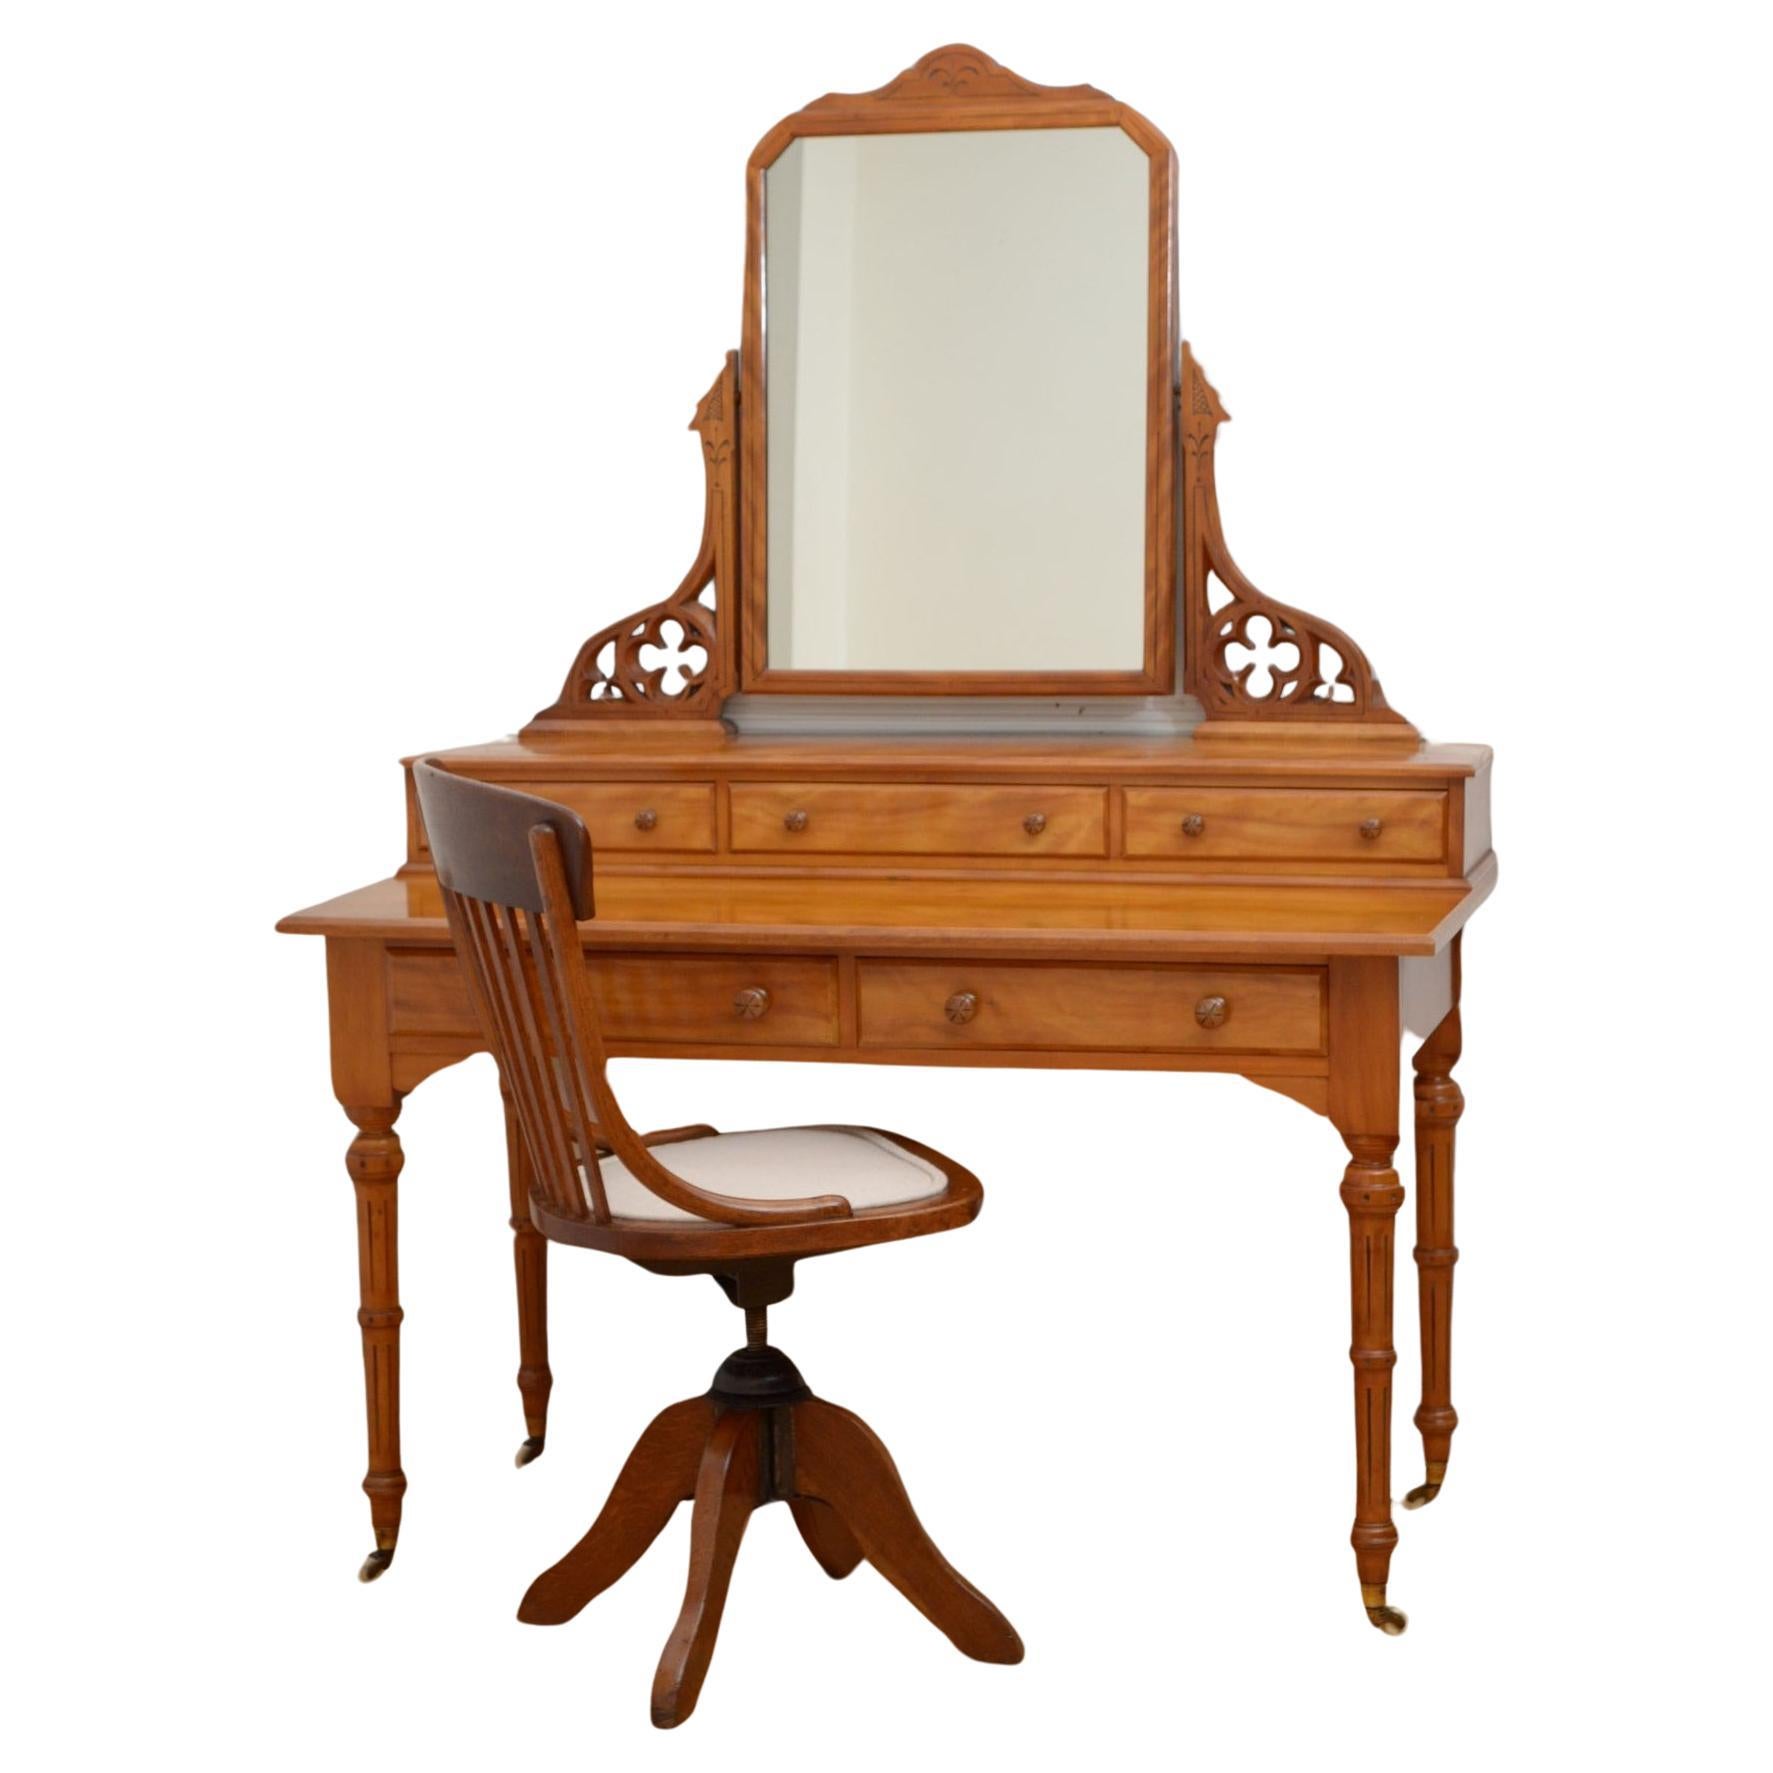 Victorian Satin birch dressing table with a Chair For Sale